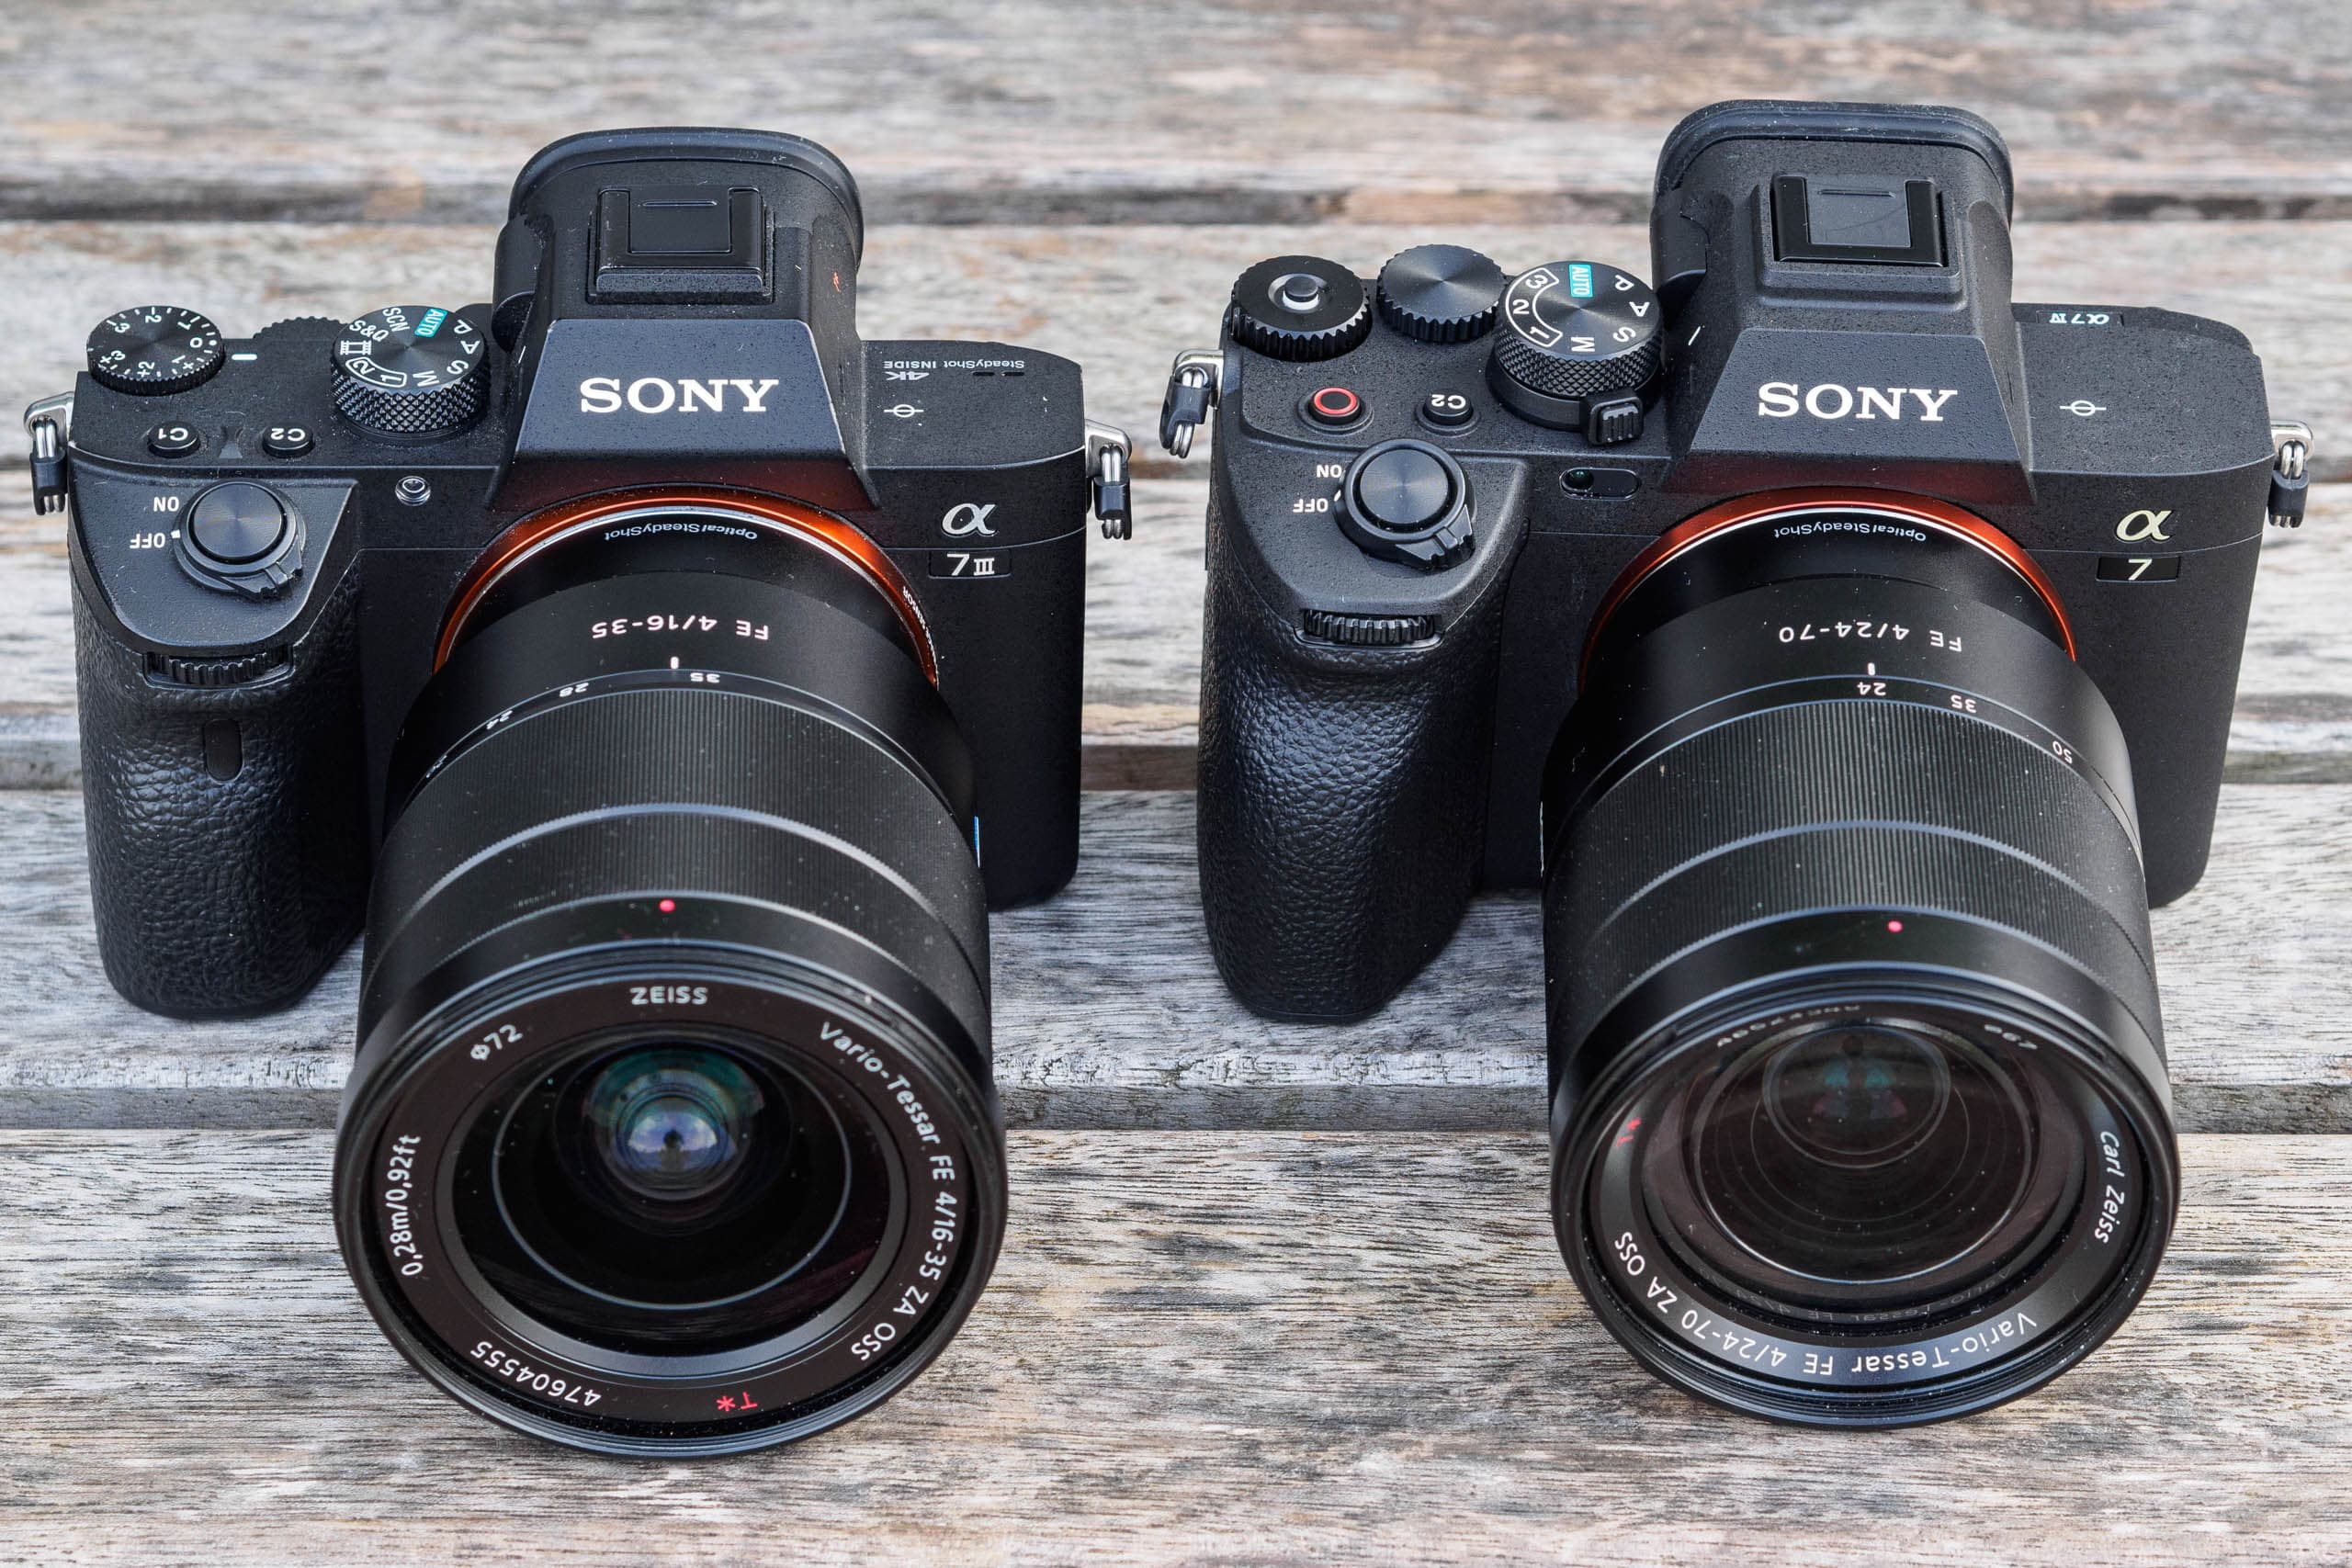 Sony Alpha 7C or Sony Alpha 7 III - which is better? - Amateur Photographer